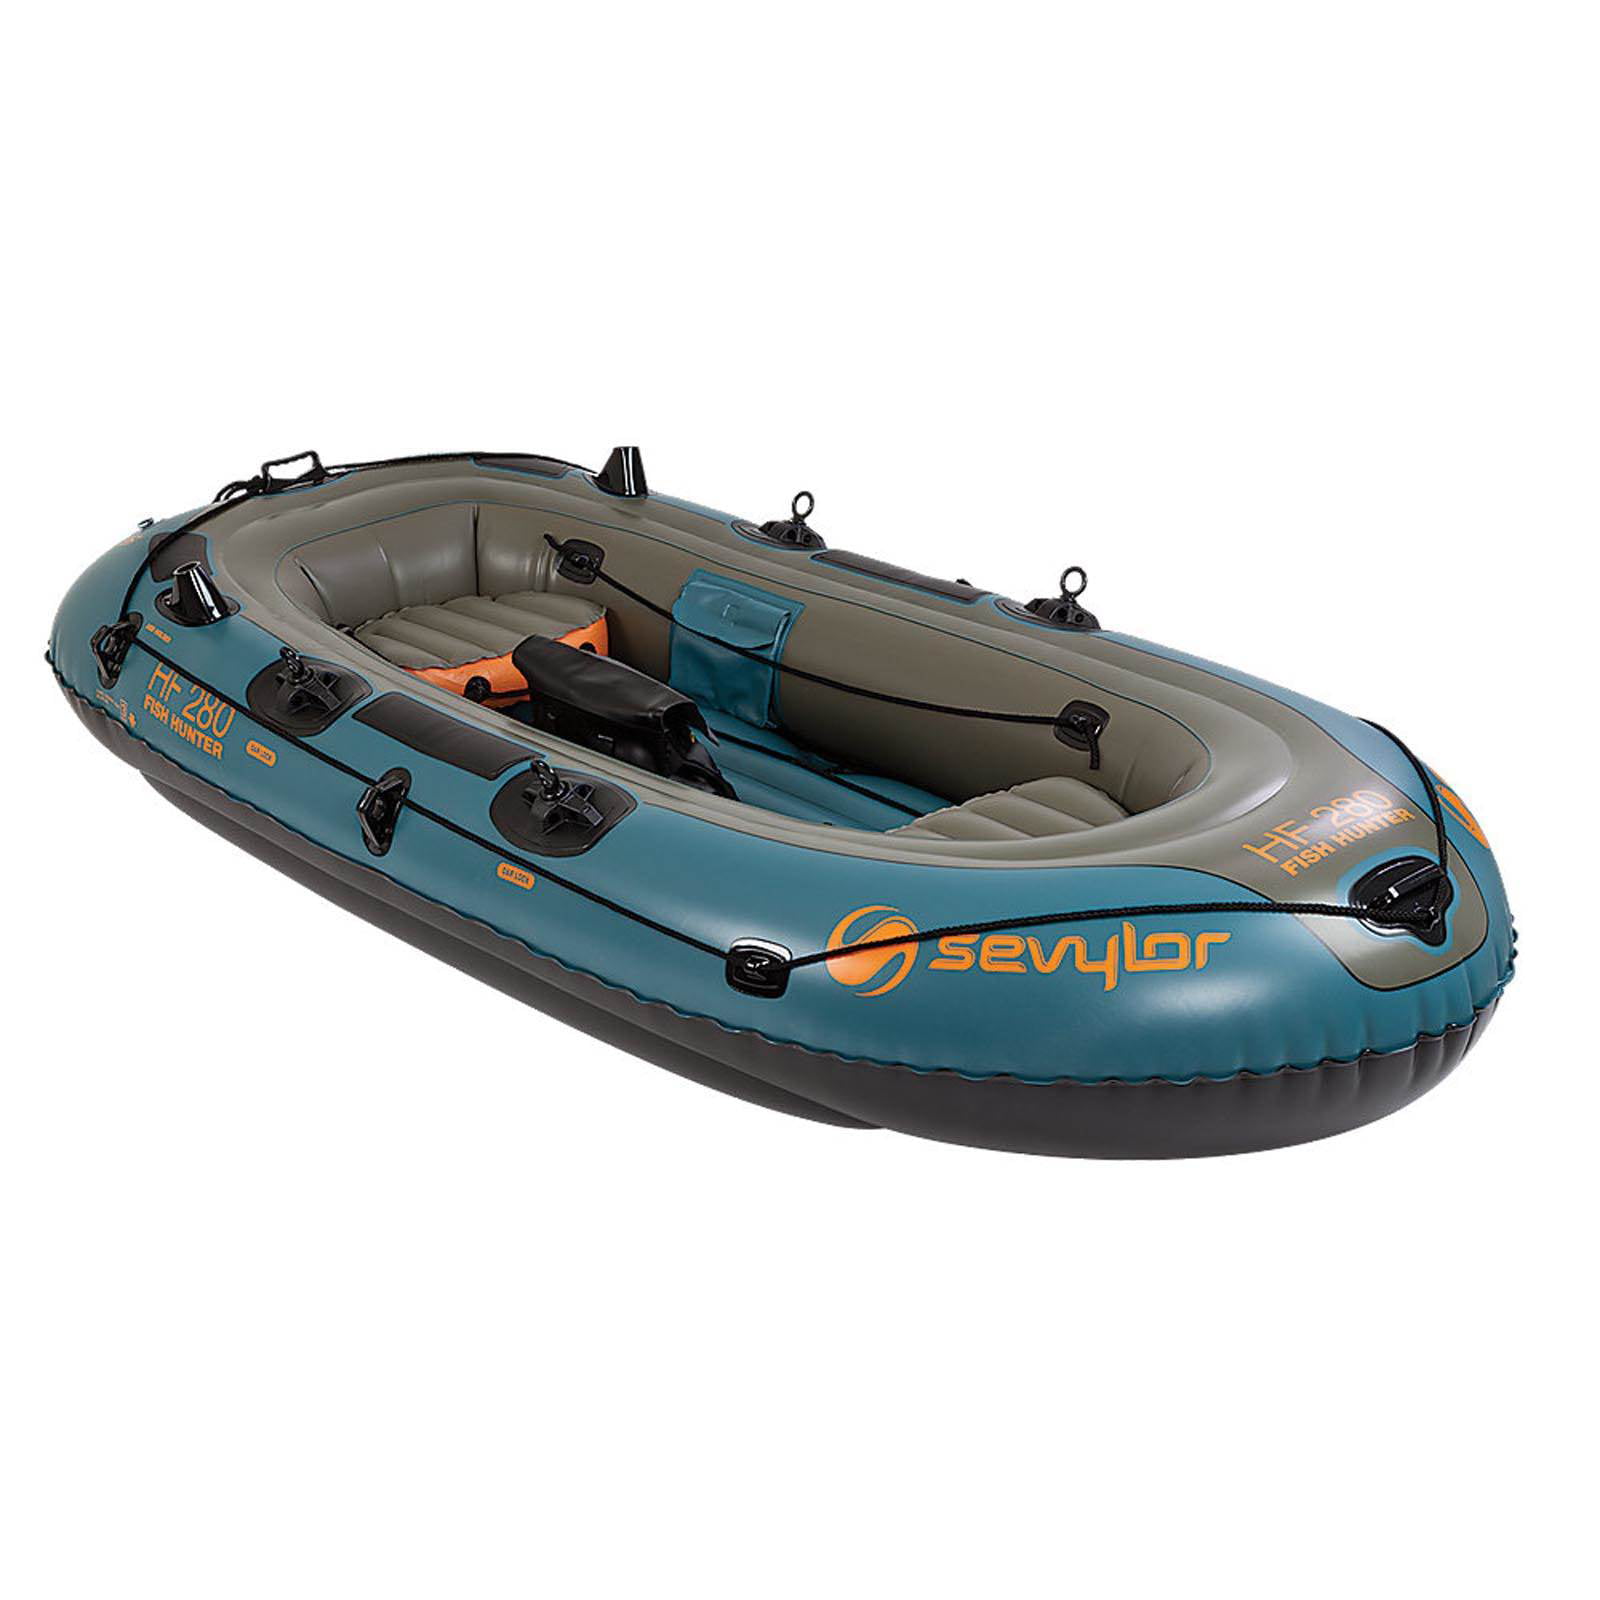 Person Child Inflatable Fishing Boat PVC Rowing Boats Carry, 47% OFF